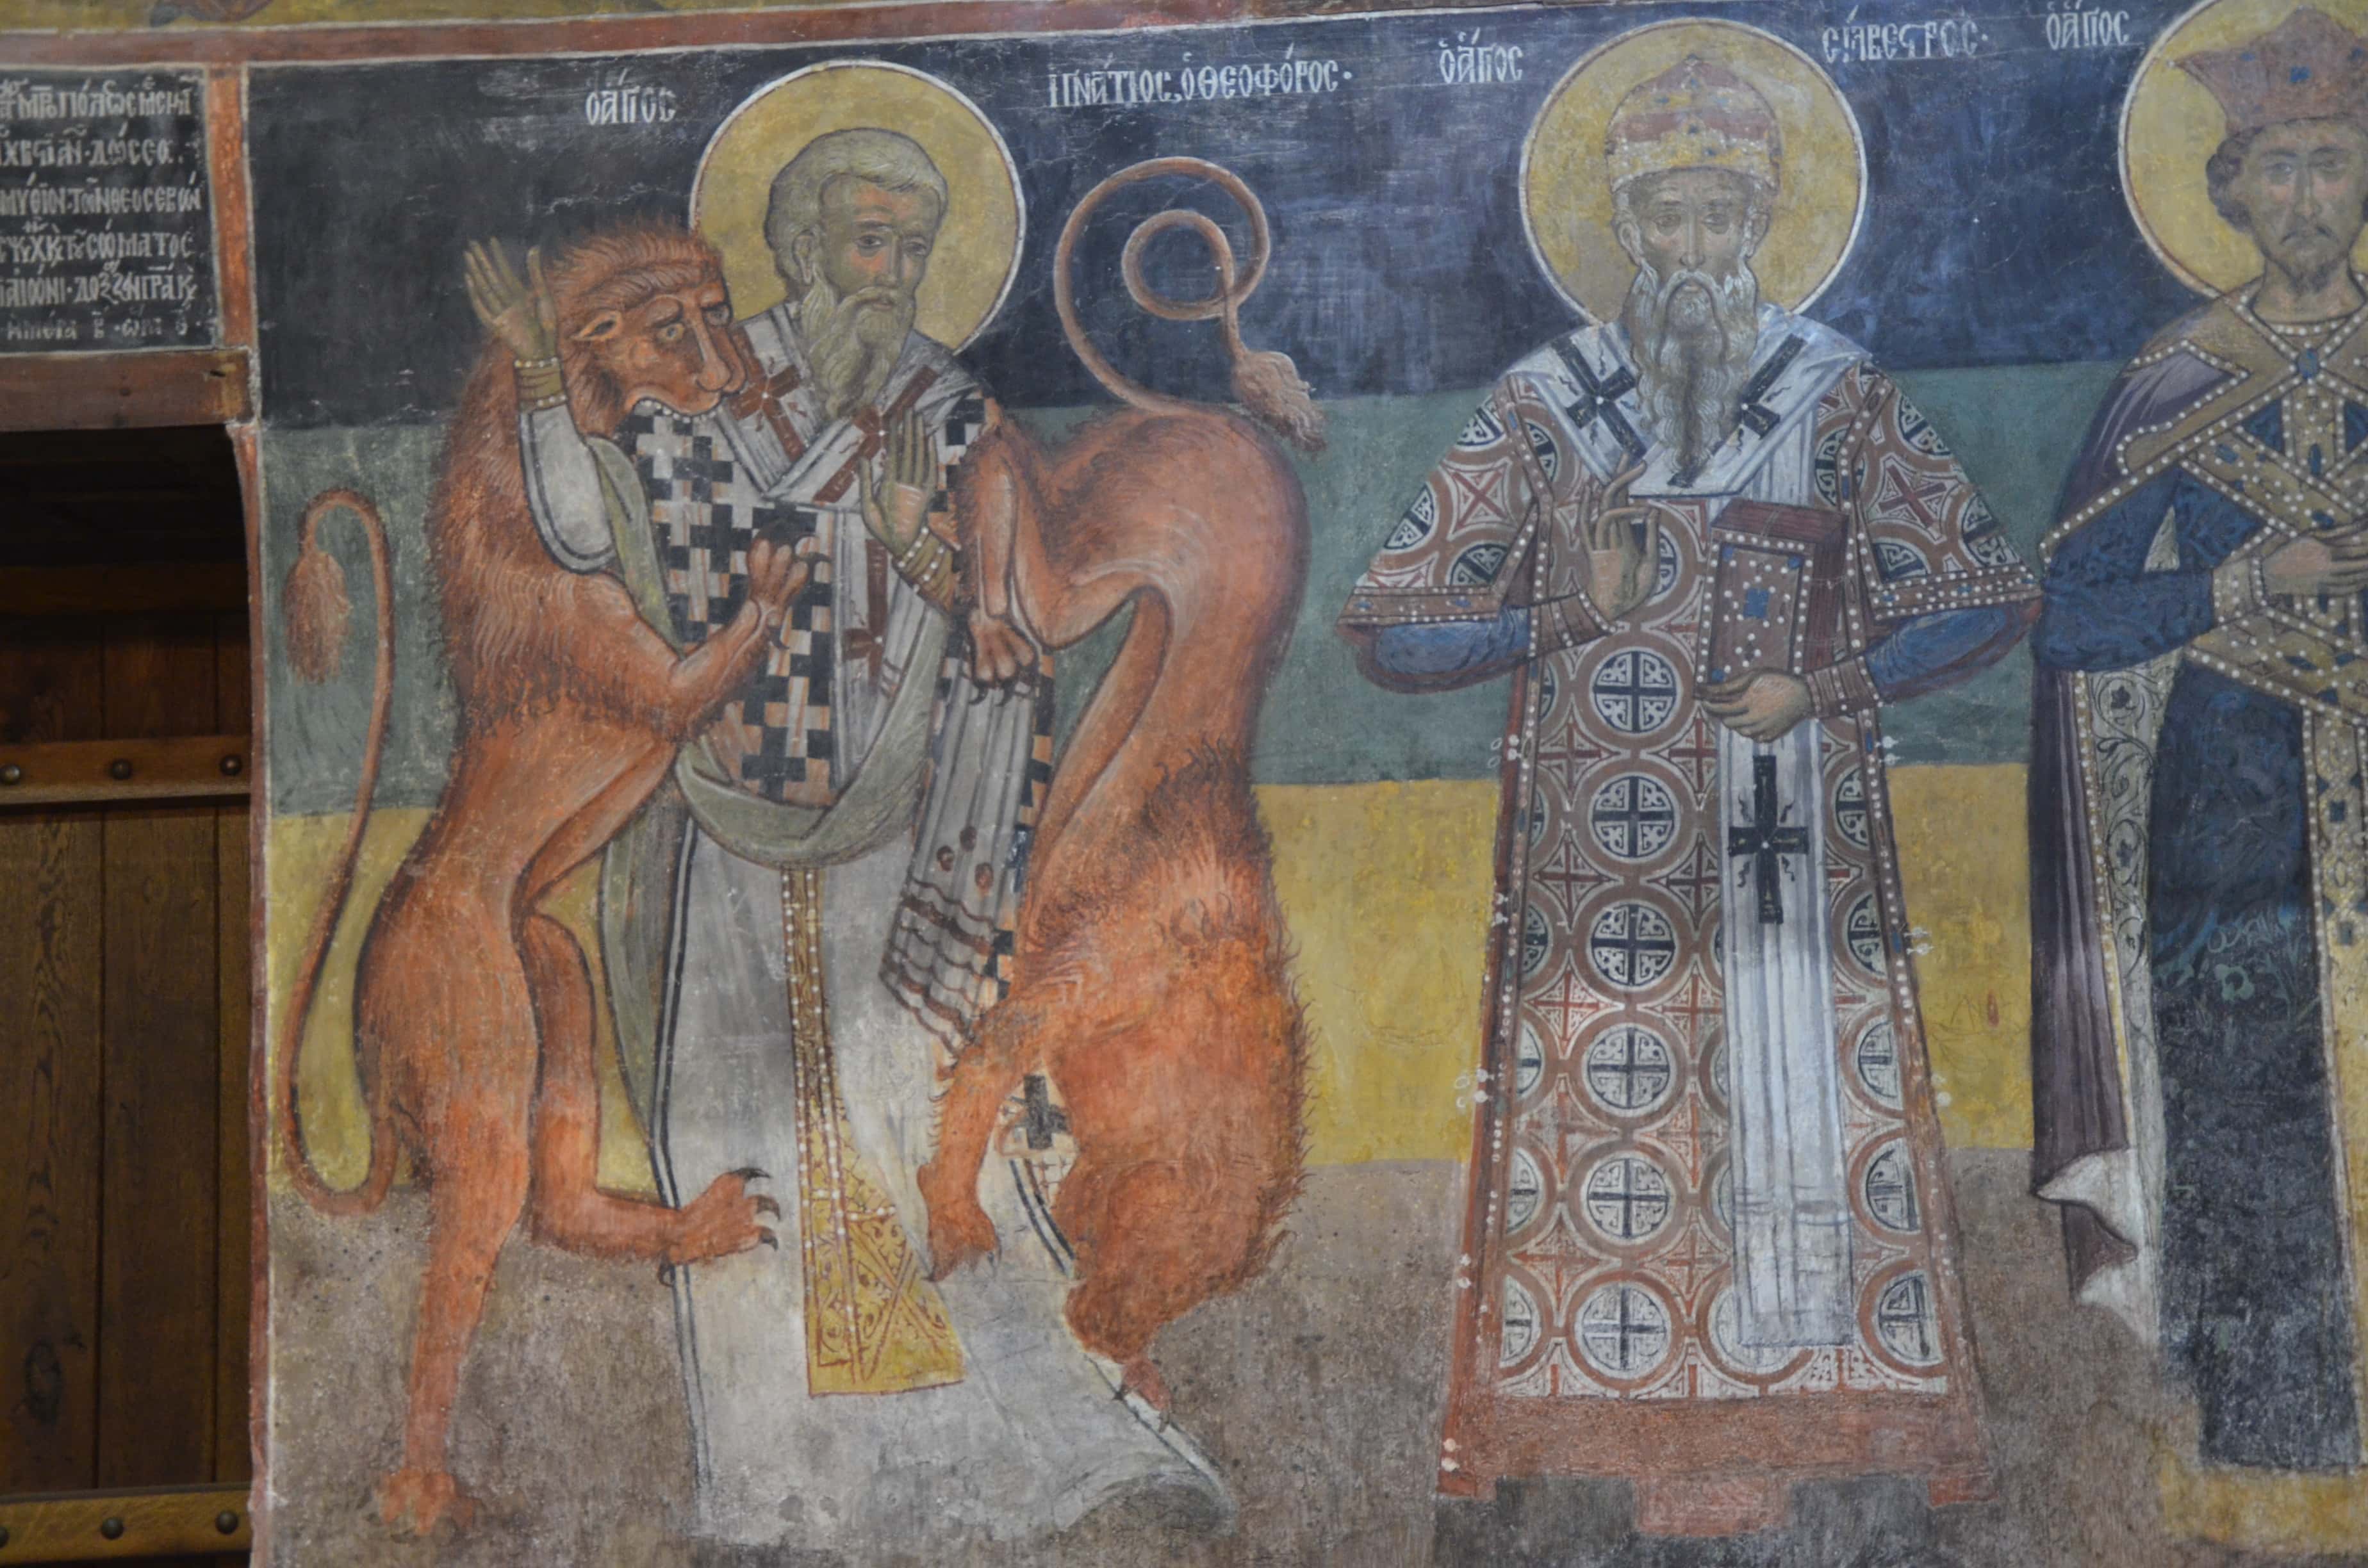 Saint Ignatius Theophorus (left) and Saint Sylvester (right) in the nave at the Church of Saint Stephen in Nessebar, Bulgaria